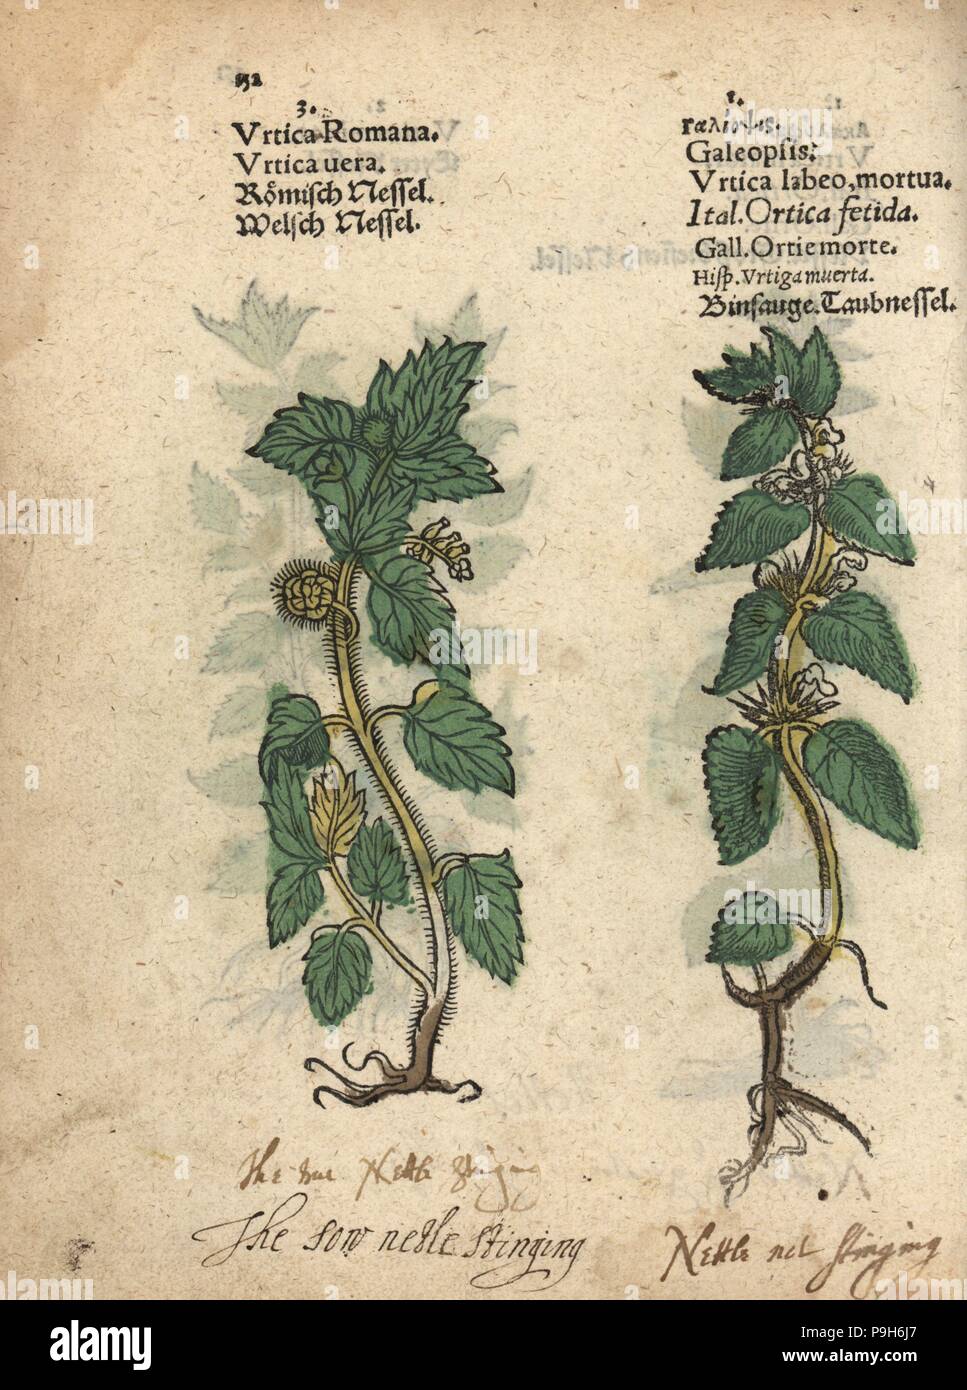 Stinging nettle, Urtica dioica, and hemp nettle, Galeopsis speciosa. Handcoloured woodblock engraving of a botanical illustration from Adam Lonicer's Krauterbuch, or Herbal, Frankfurt, 1557. This from a 17th century pirate edition or atlas of illustrations only, with captions in Latin, Greek, French, Italian, German, and in English manuscript. Stock Photo